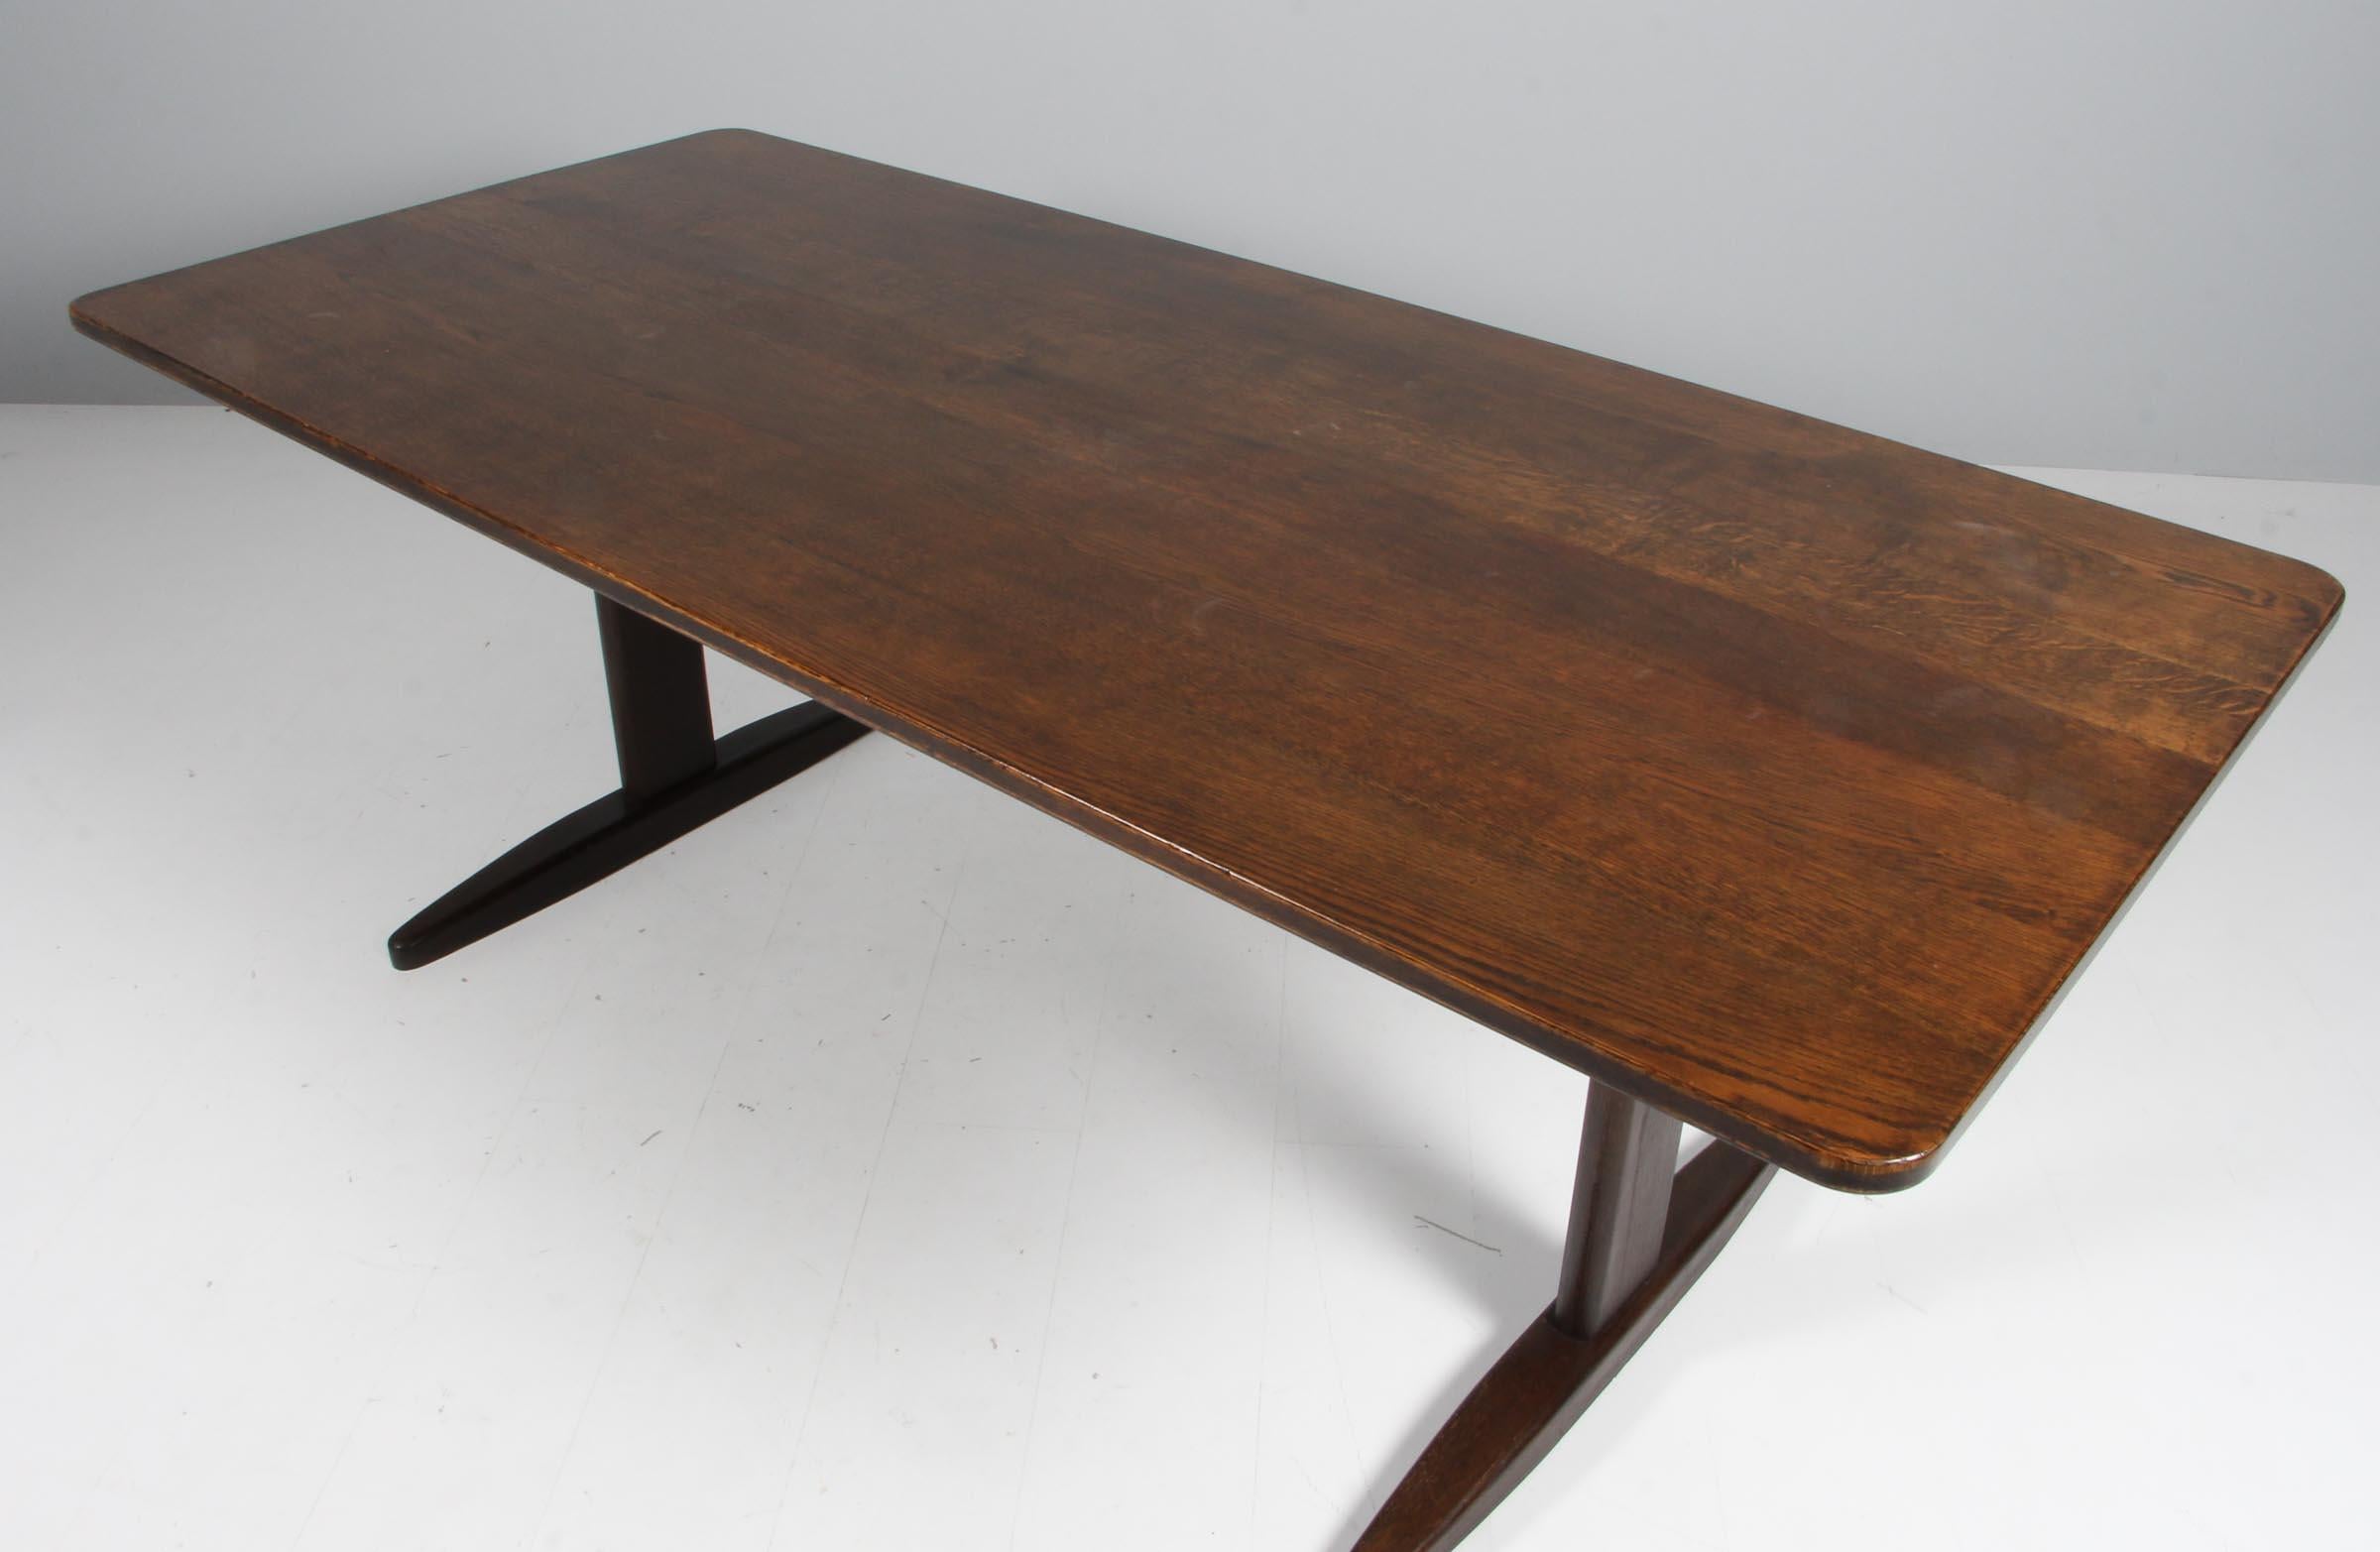 Børge Mogensen shaker dining table in solid smoked oak, extension leafes of smoked beech.

Made by C.M. Madsen.